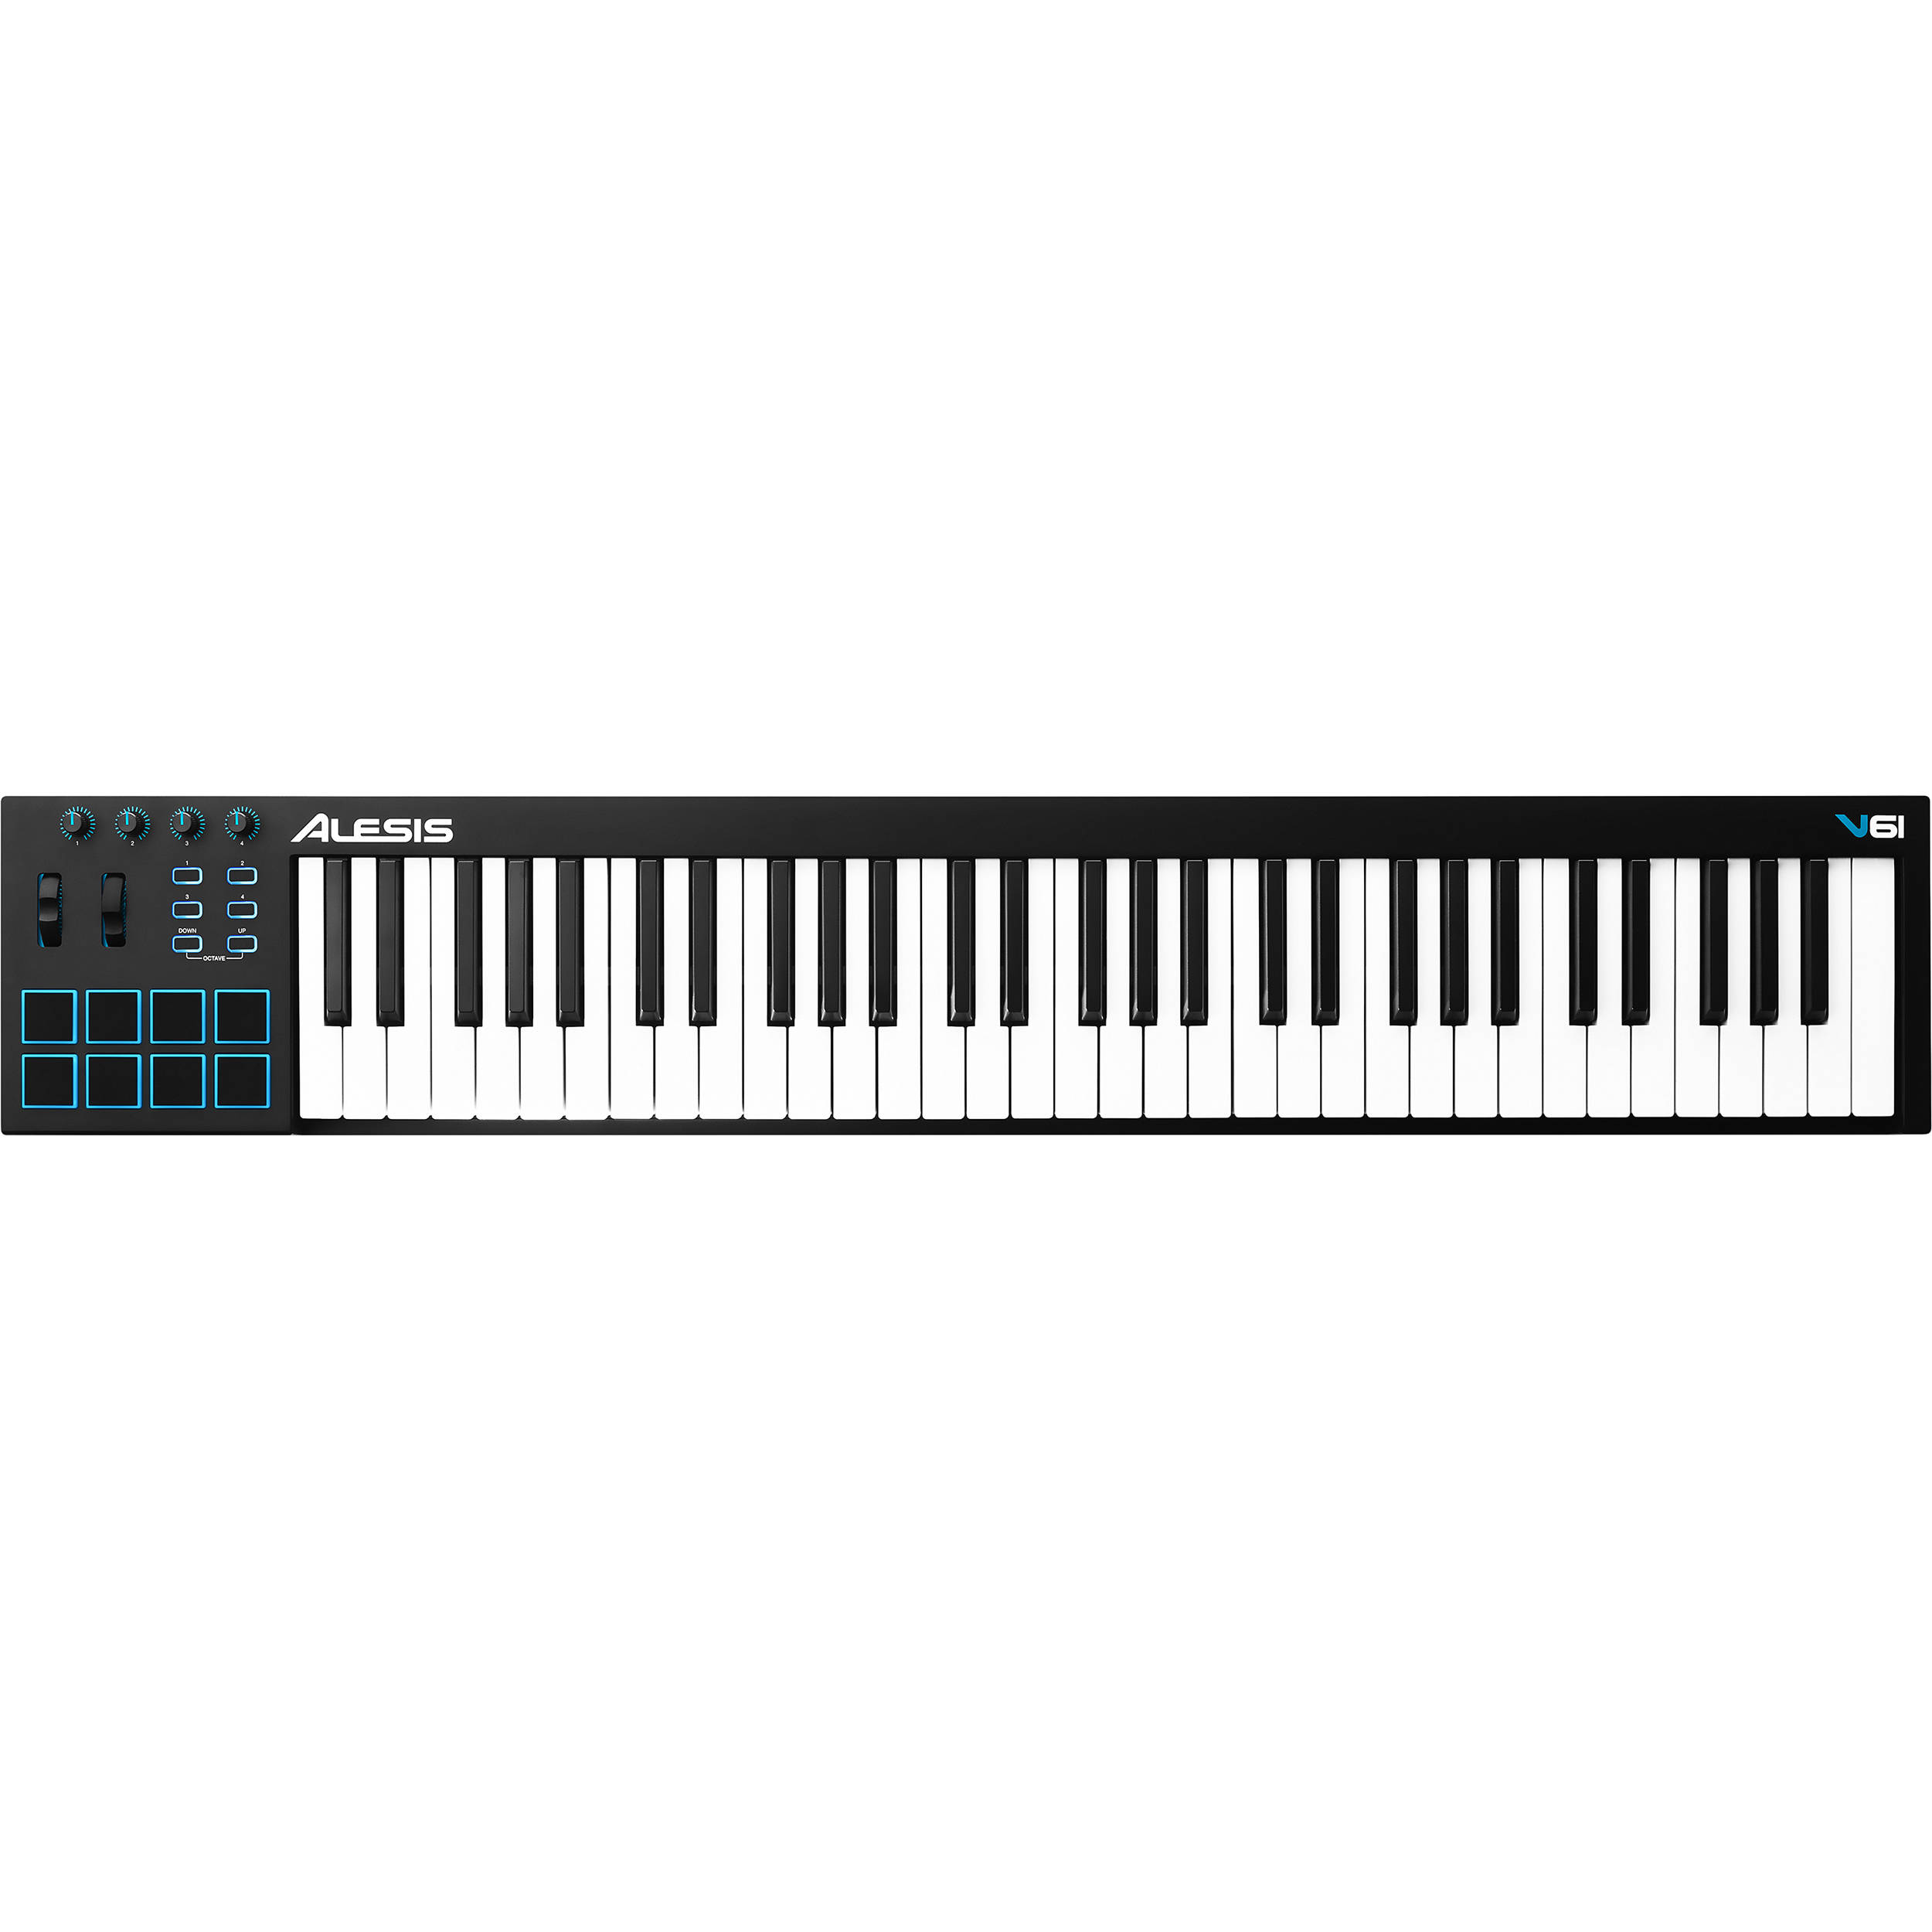 First Included 61 Key USB MIDI Keyboard Controller with 8 Backlit Pads Alesis V61 Renewed Plus a Professional Software Suite with ProTools 4 Assignable Knobs and Buttons